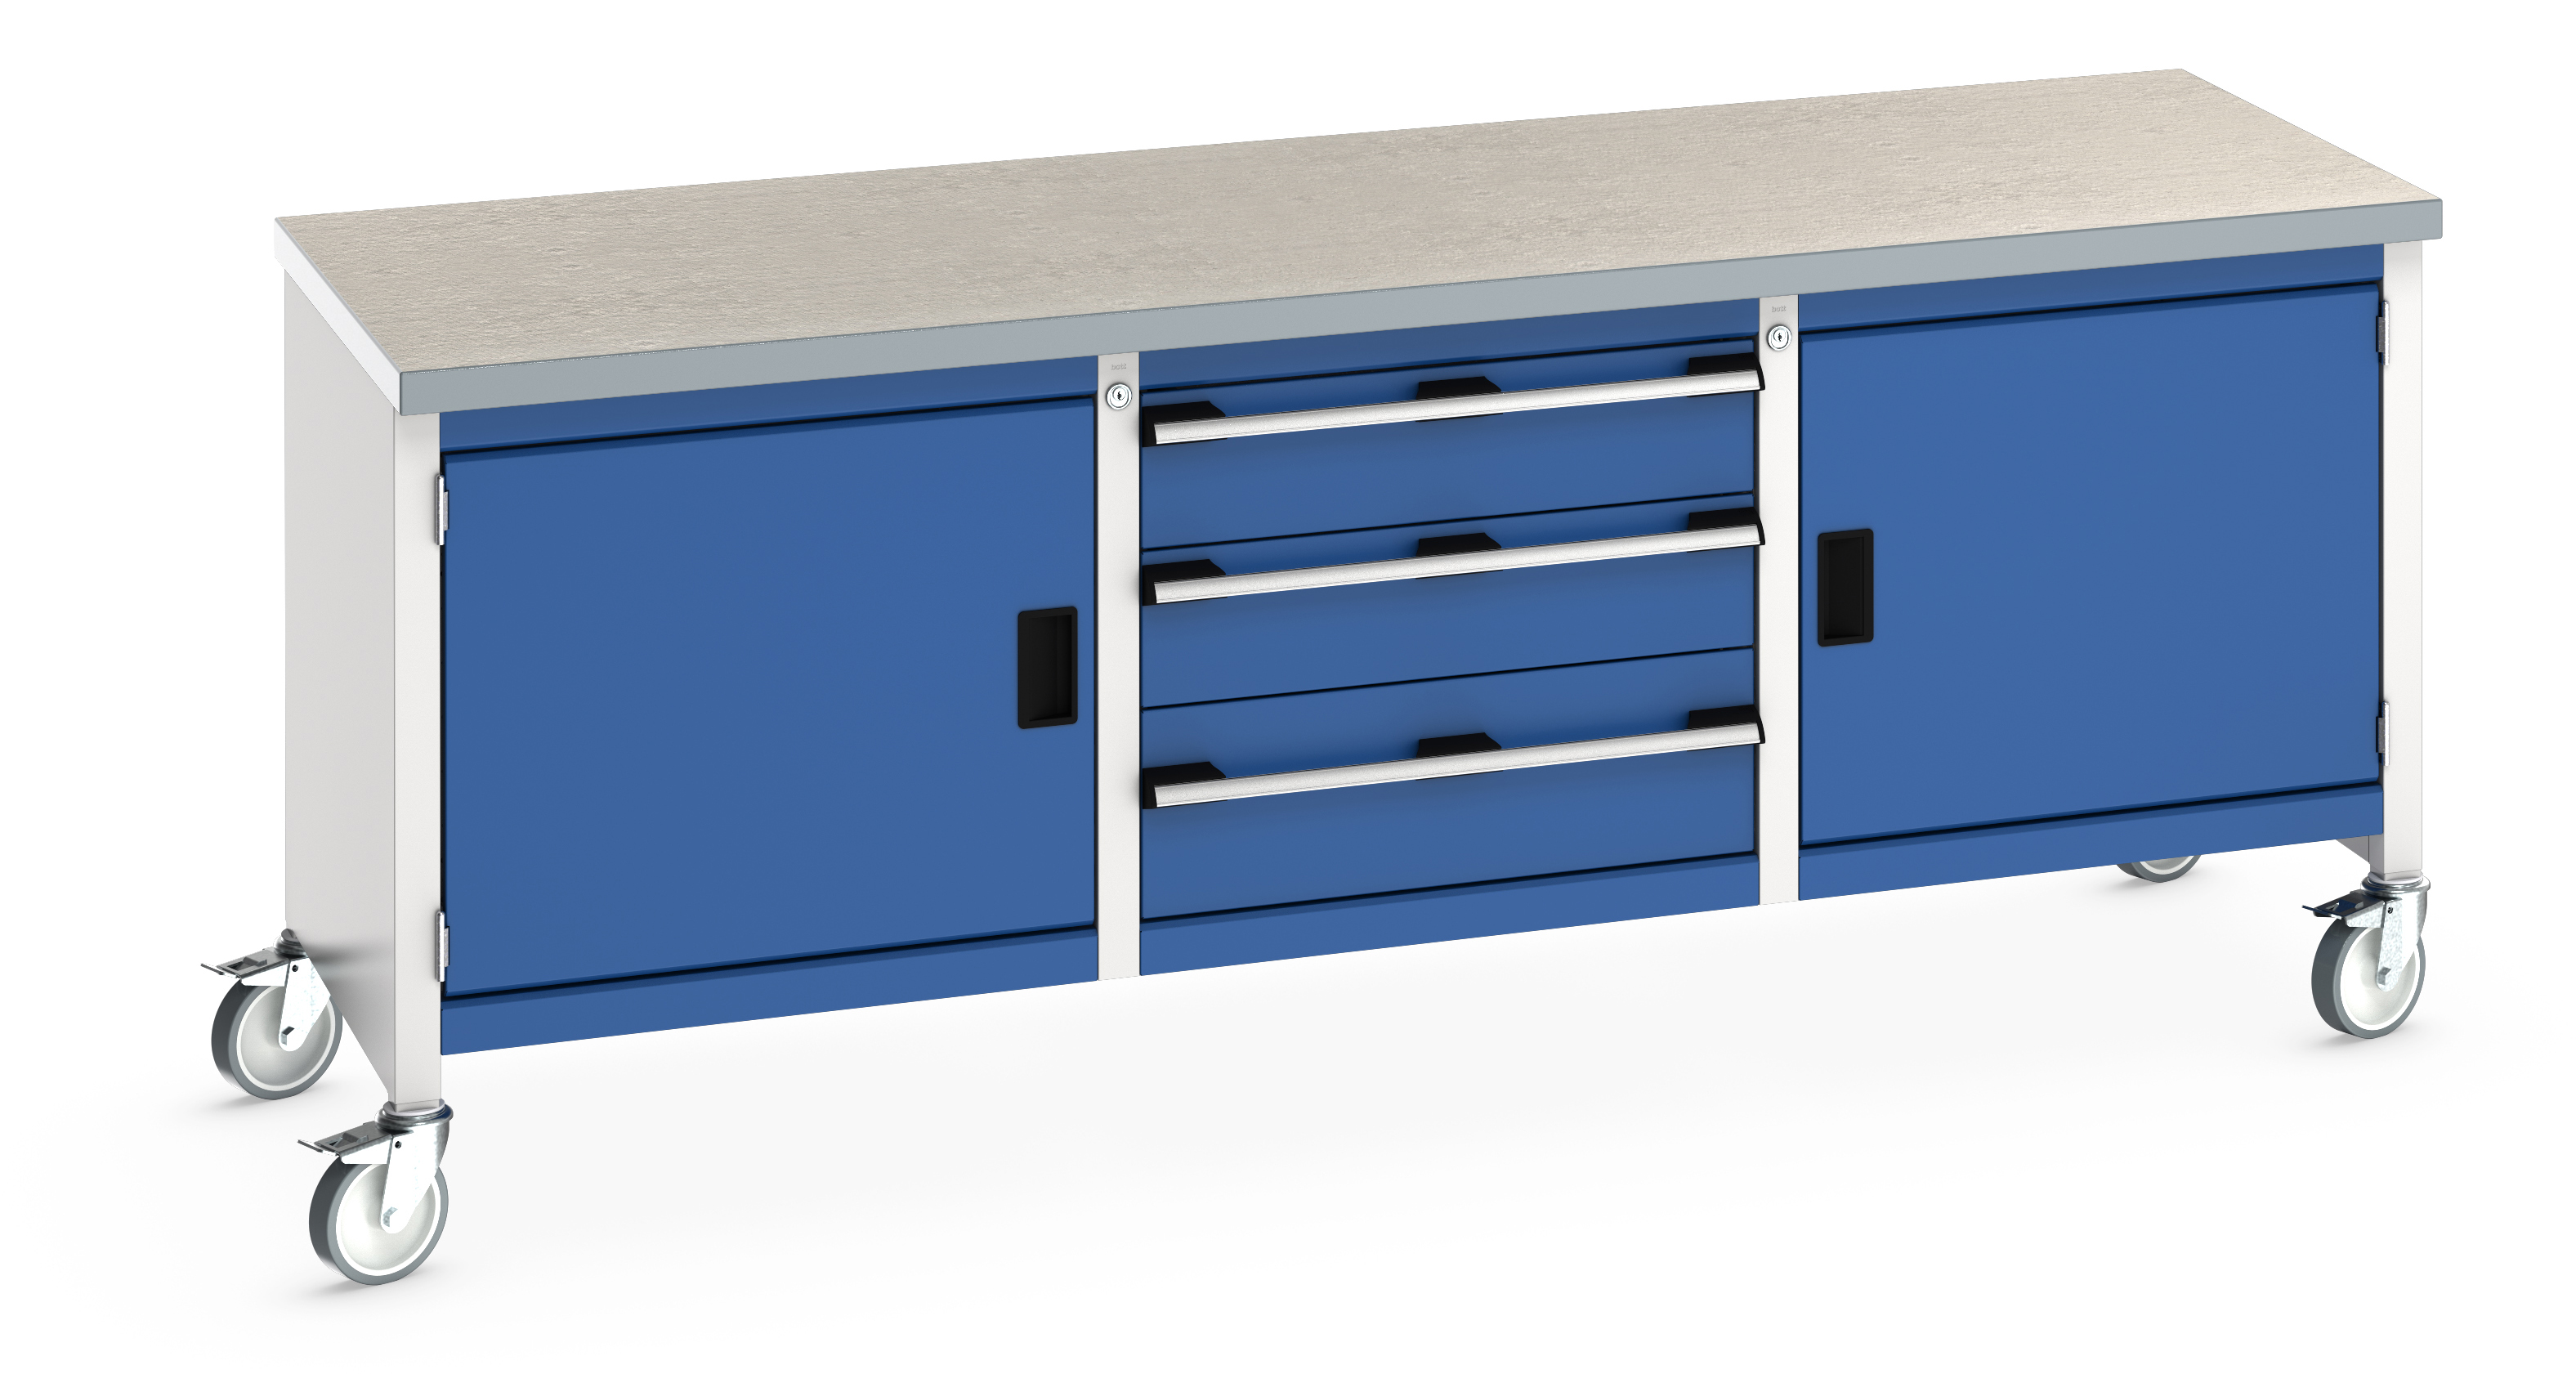 Bott Cubio Mobile Storage Bench With Full Cupboard / 3 Drawer Cabinet / Full Cupboard - 41002126.11V